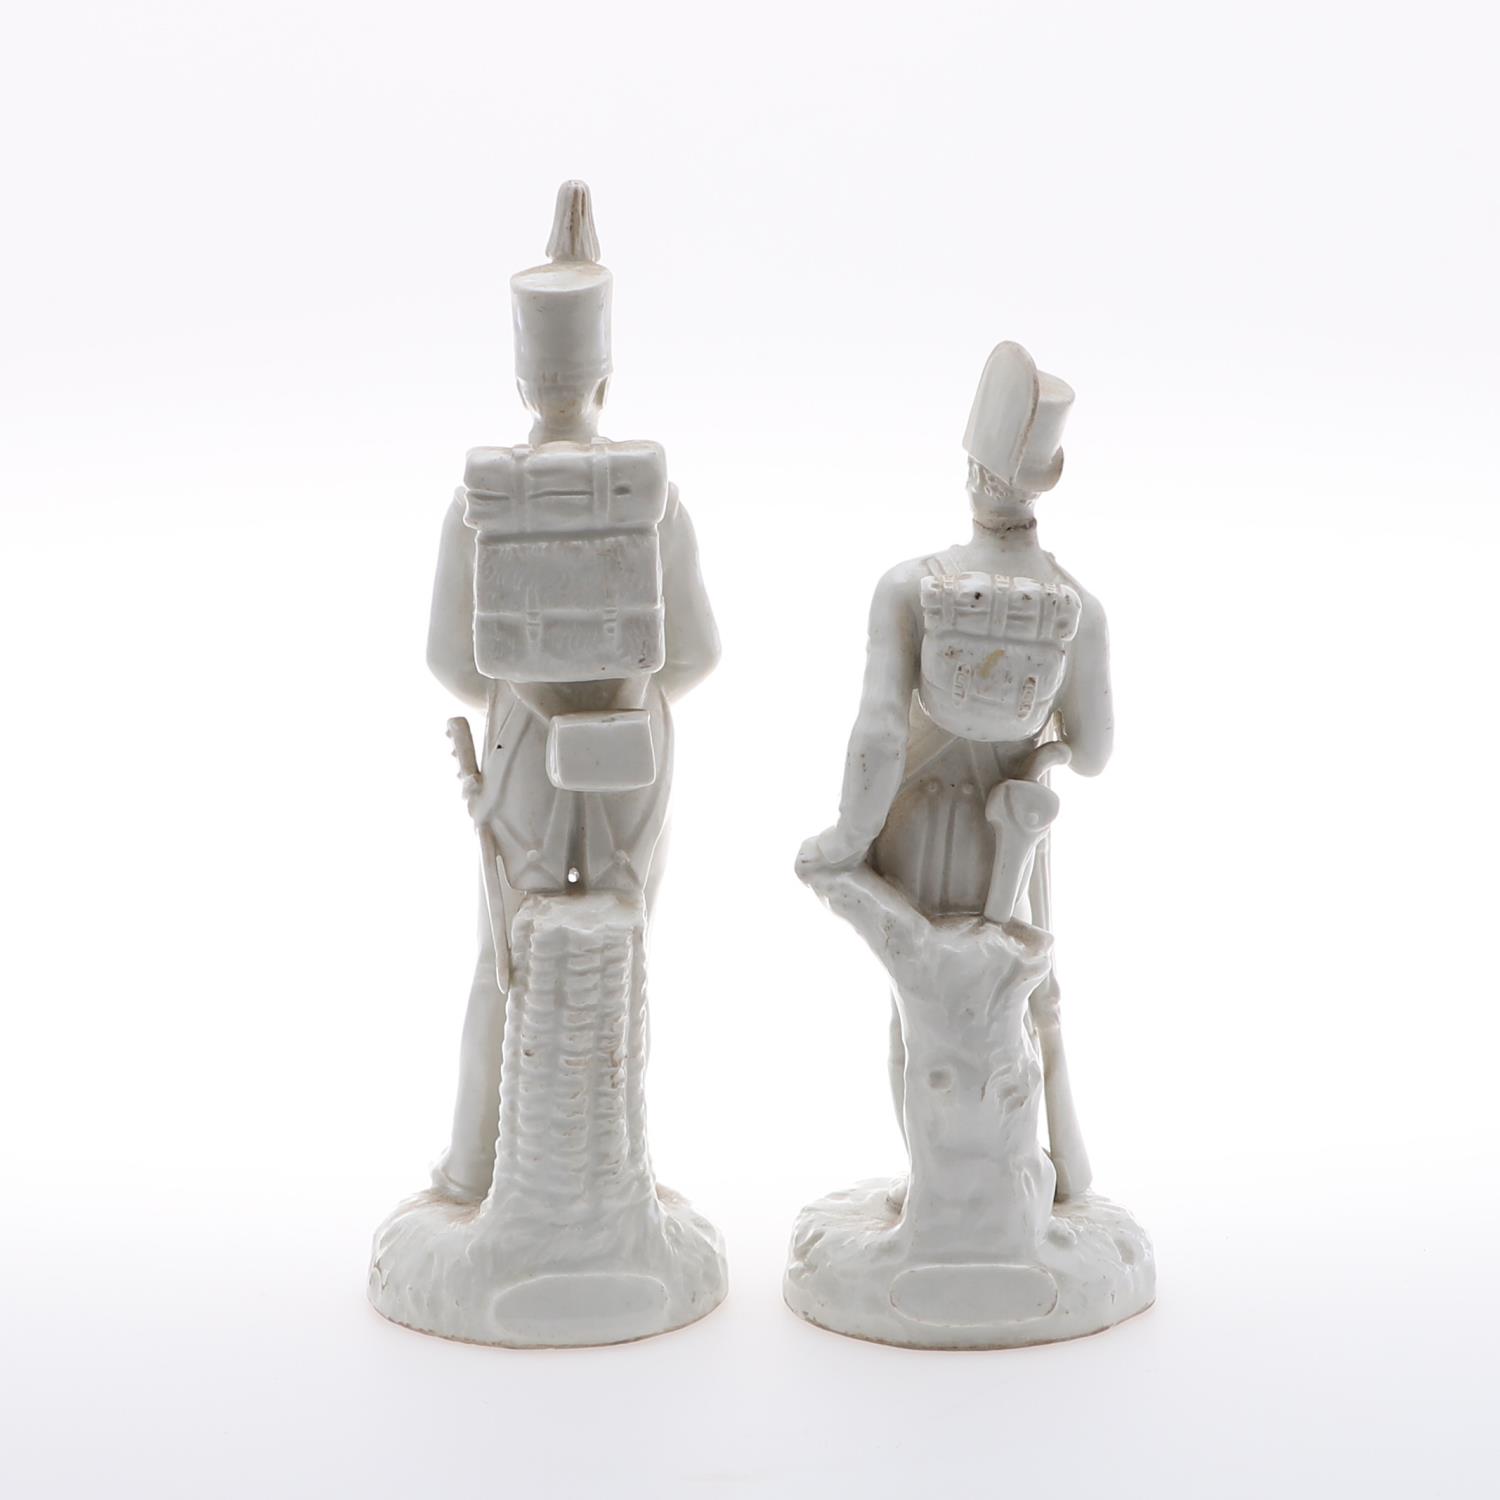 TWO VIENNA PORCELAIN FIGURES OF SOLDIERS IN NAPOLEONIC UNIFORM. - Image 2 of 5